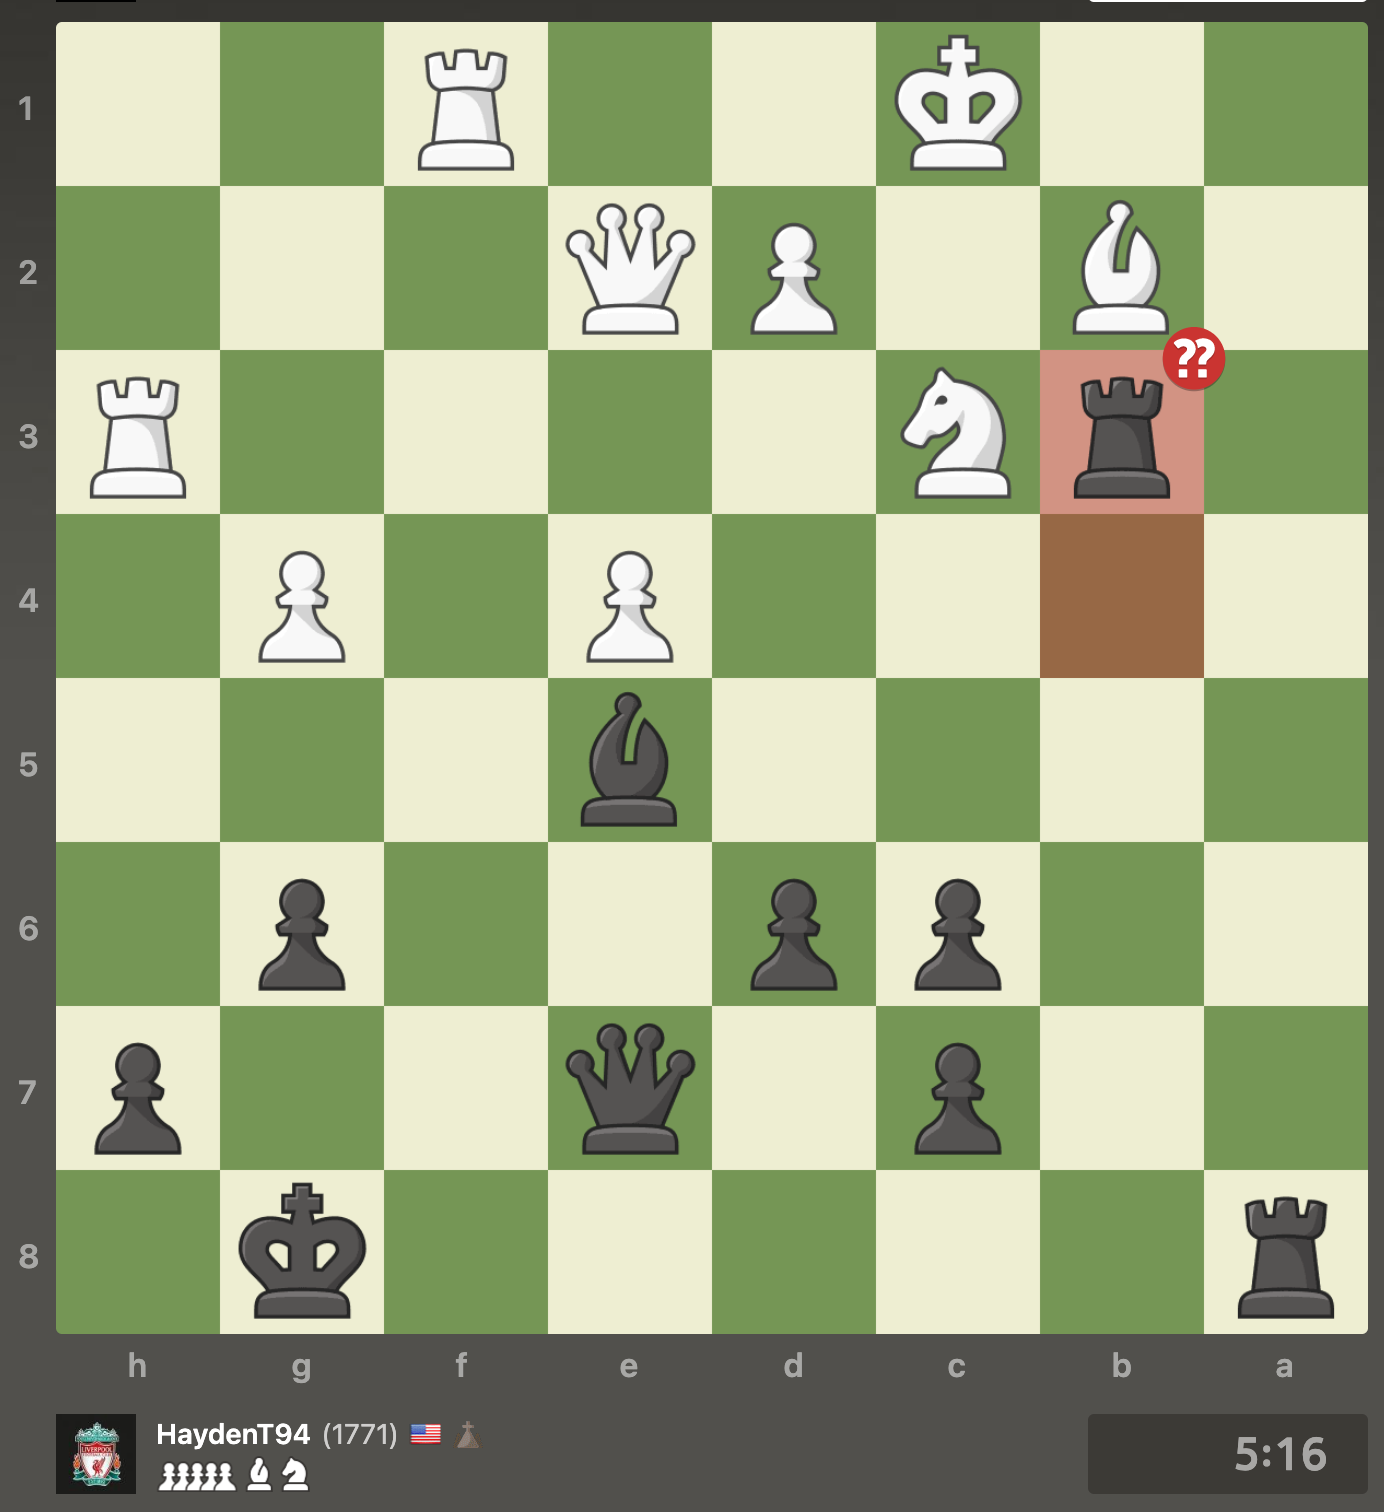 Masters Chess Academy - What Is A Blunder In Chess? In chess, a